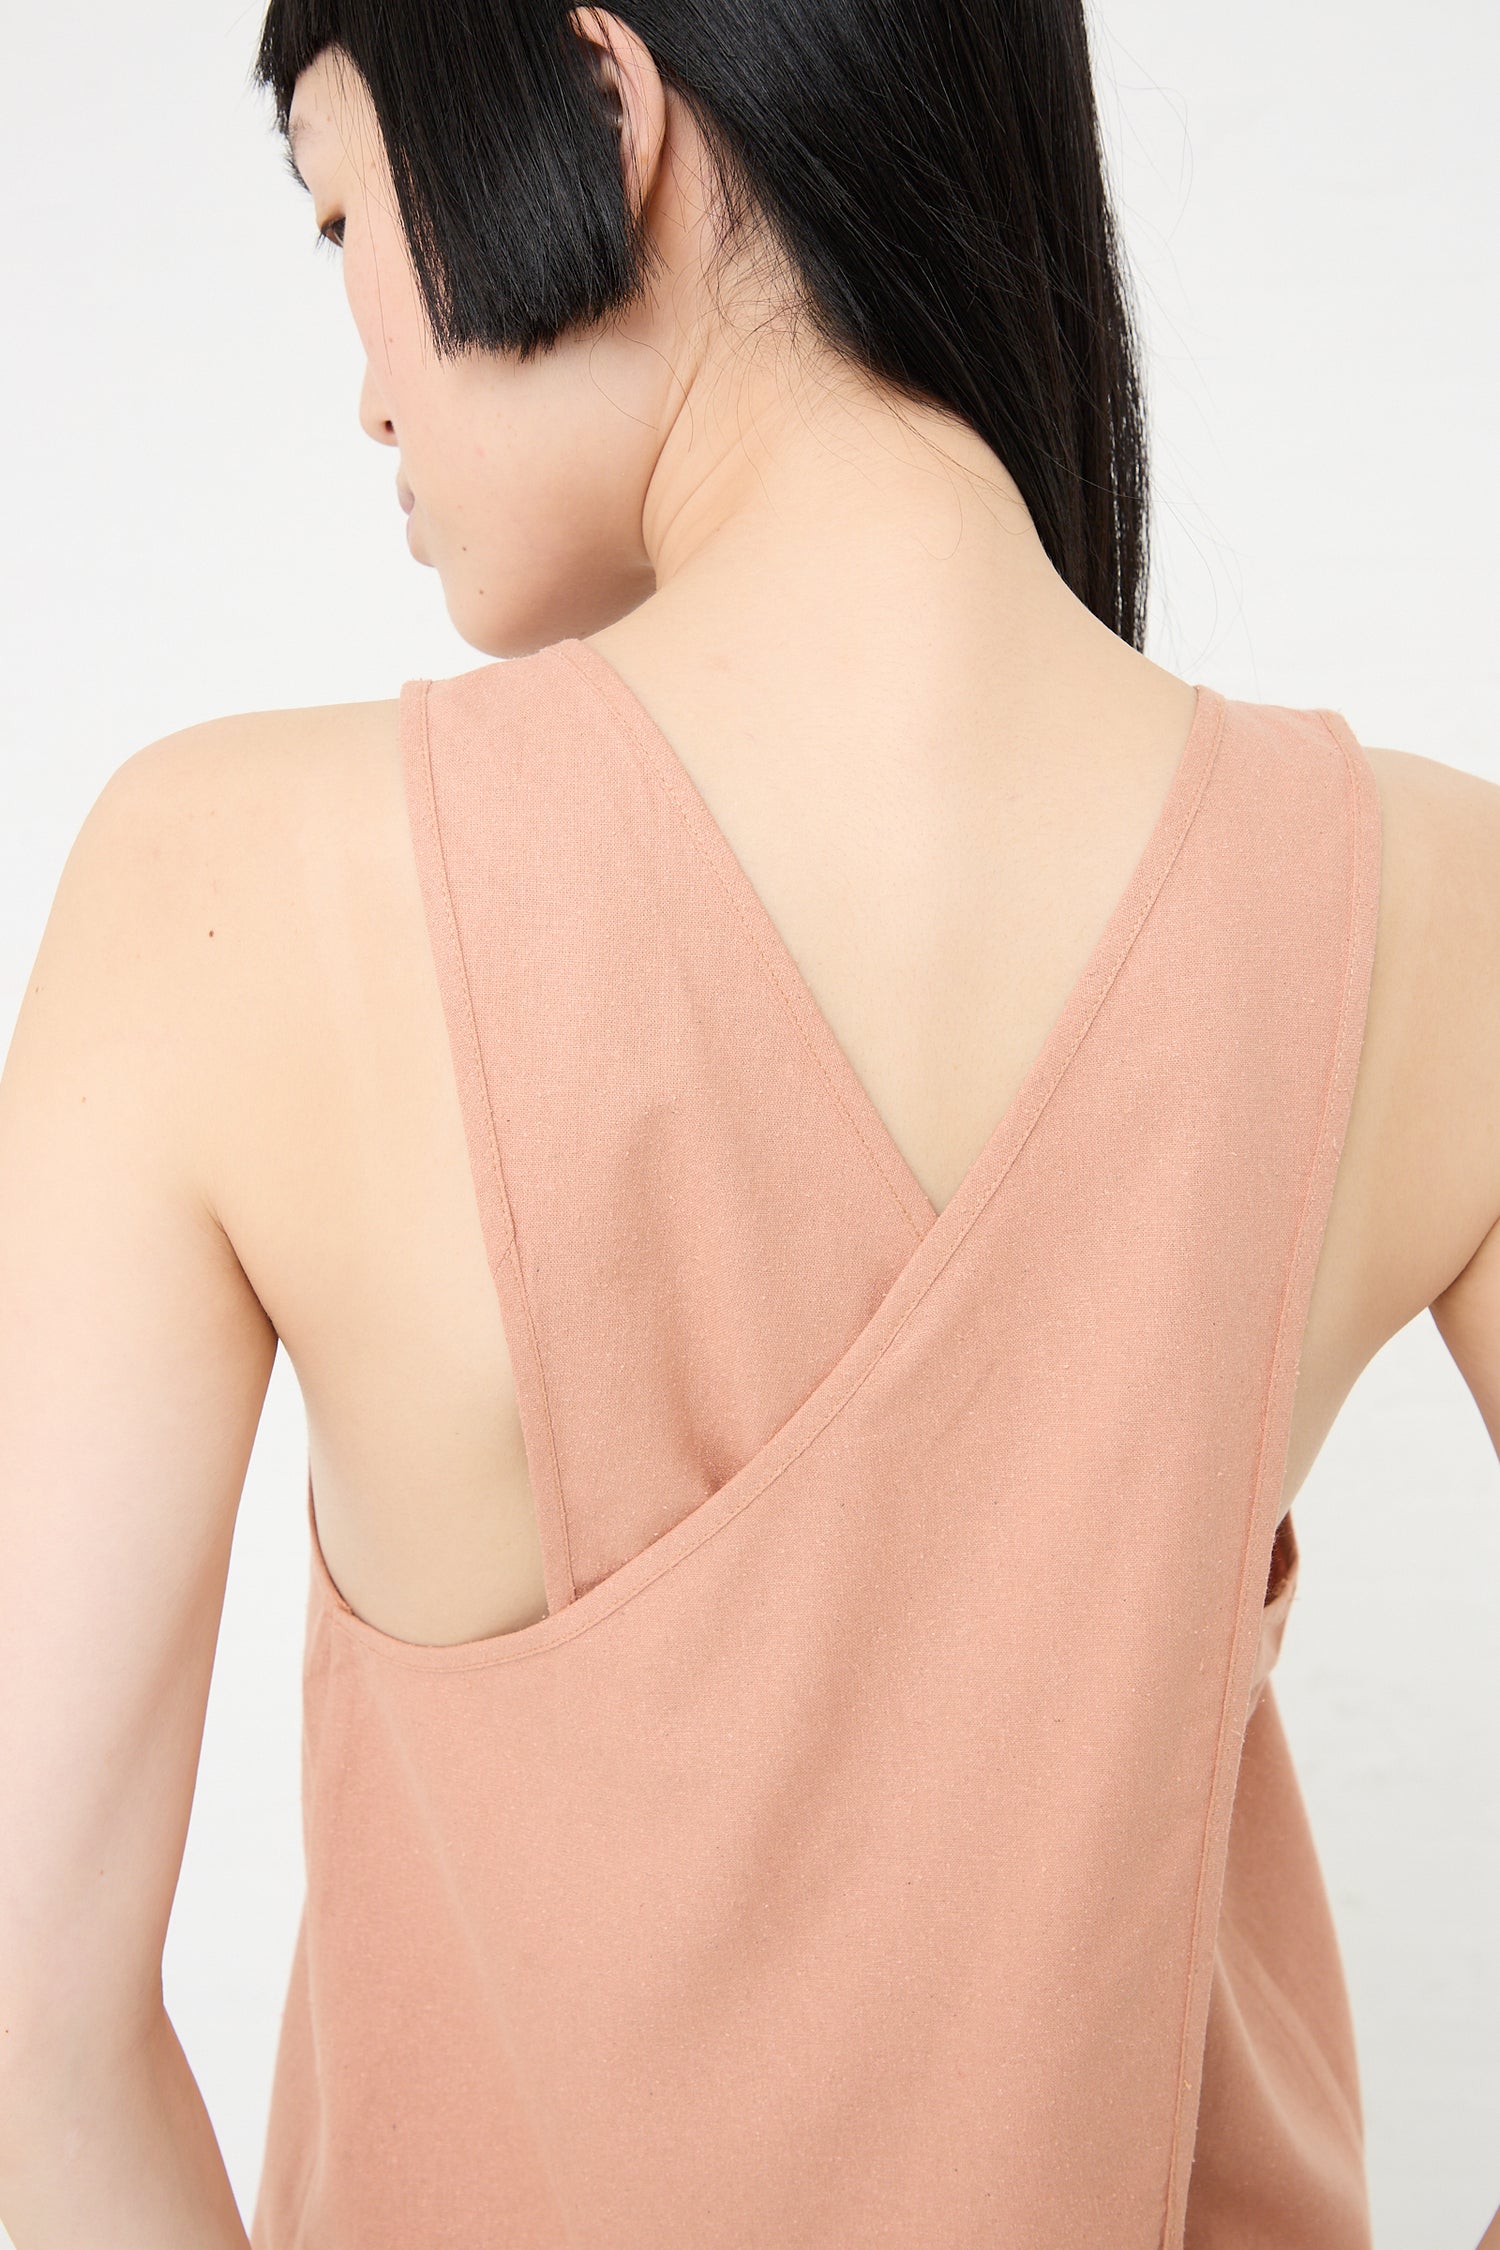 A woman with short hair wearing a sleeveless Wild Silk Apron Top in Sid Pink by Baserange with a v-back design, embodying sustainable fashion.